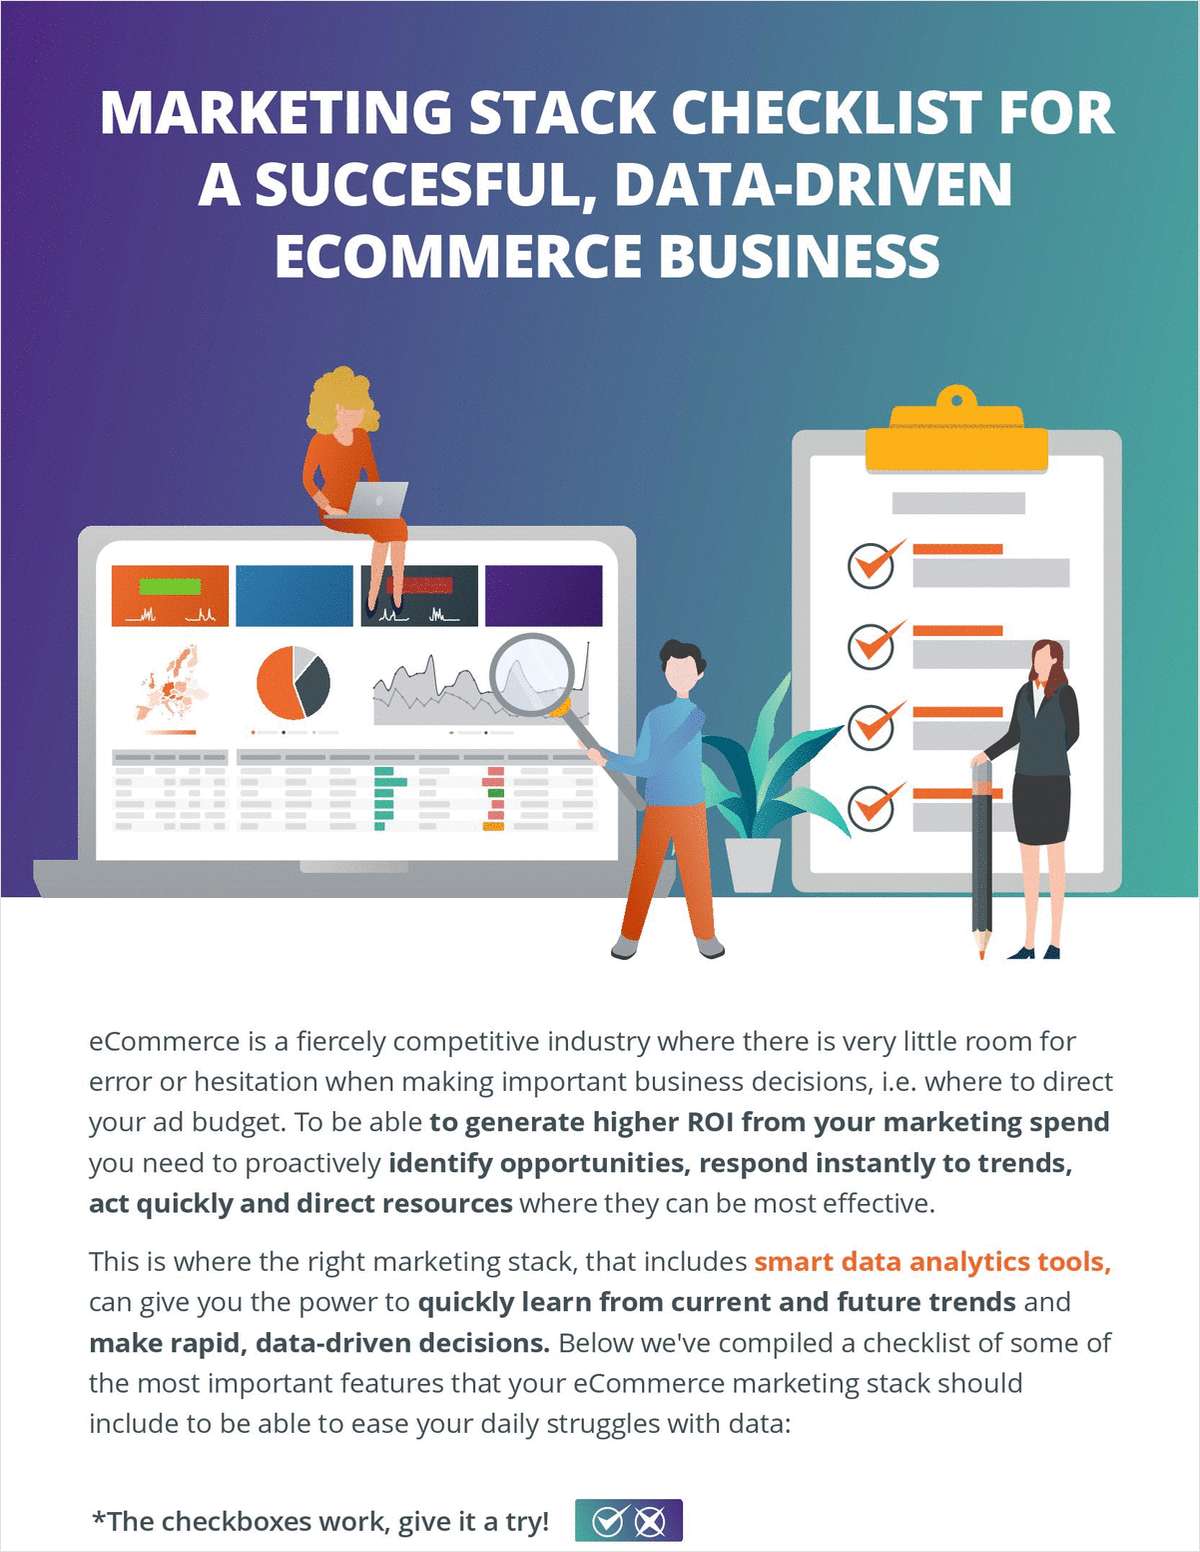 Marketing Stack Checklist - for a Successful Data-Driven eCommerce Business